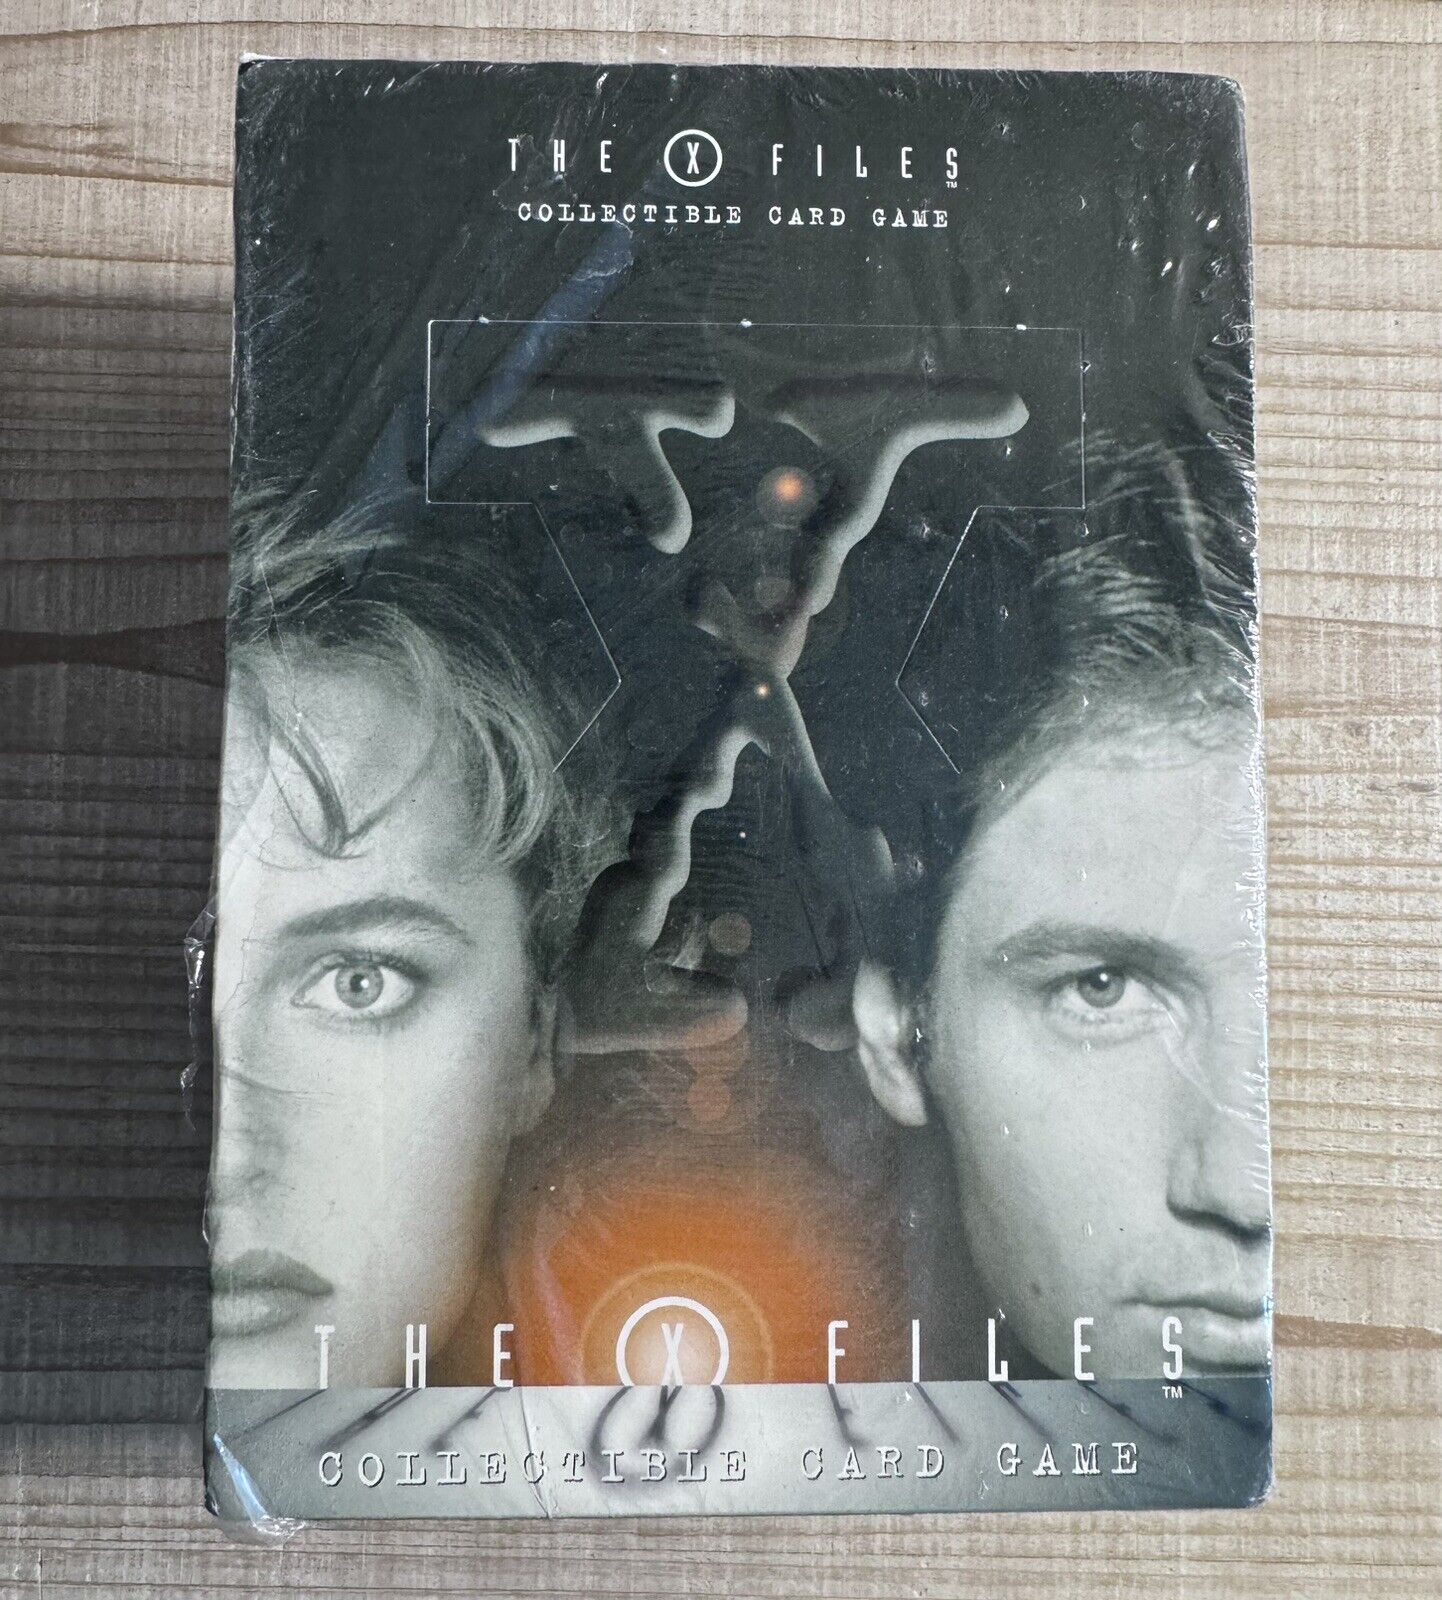 X Files CCG Trading Cards 12 STARTER DECK (60 cards each) Factory Sealed.